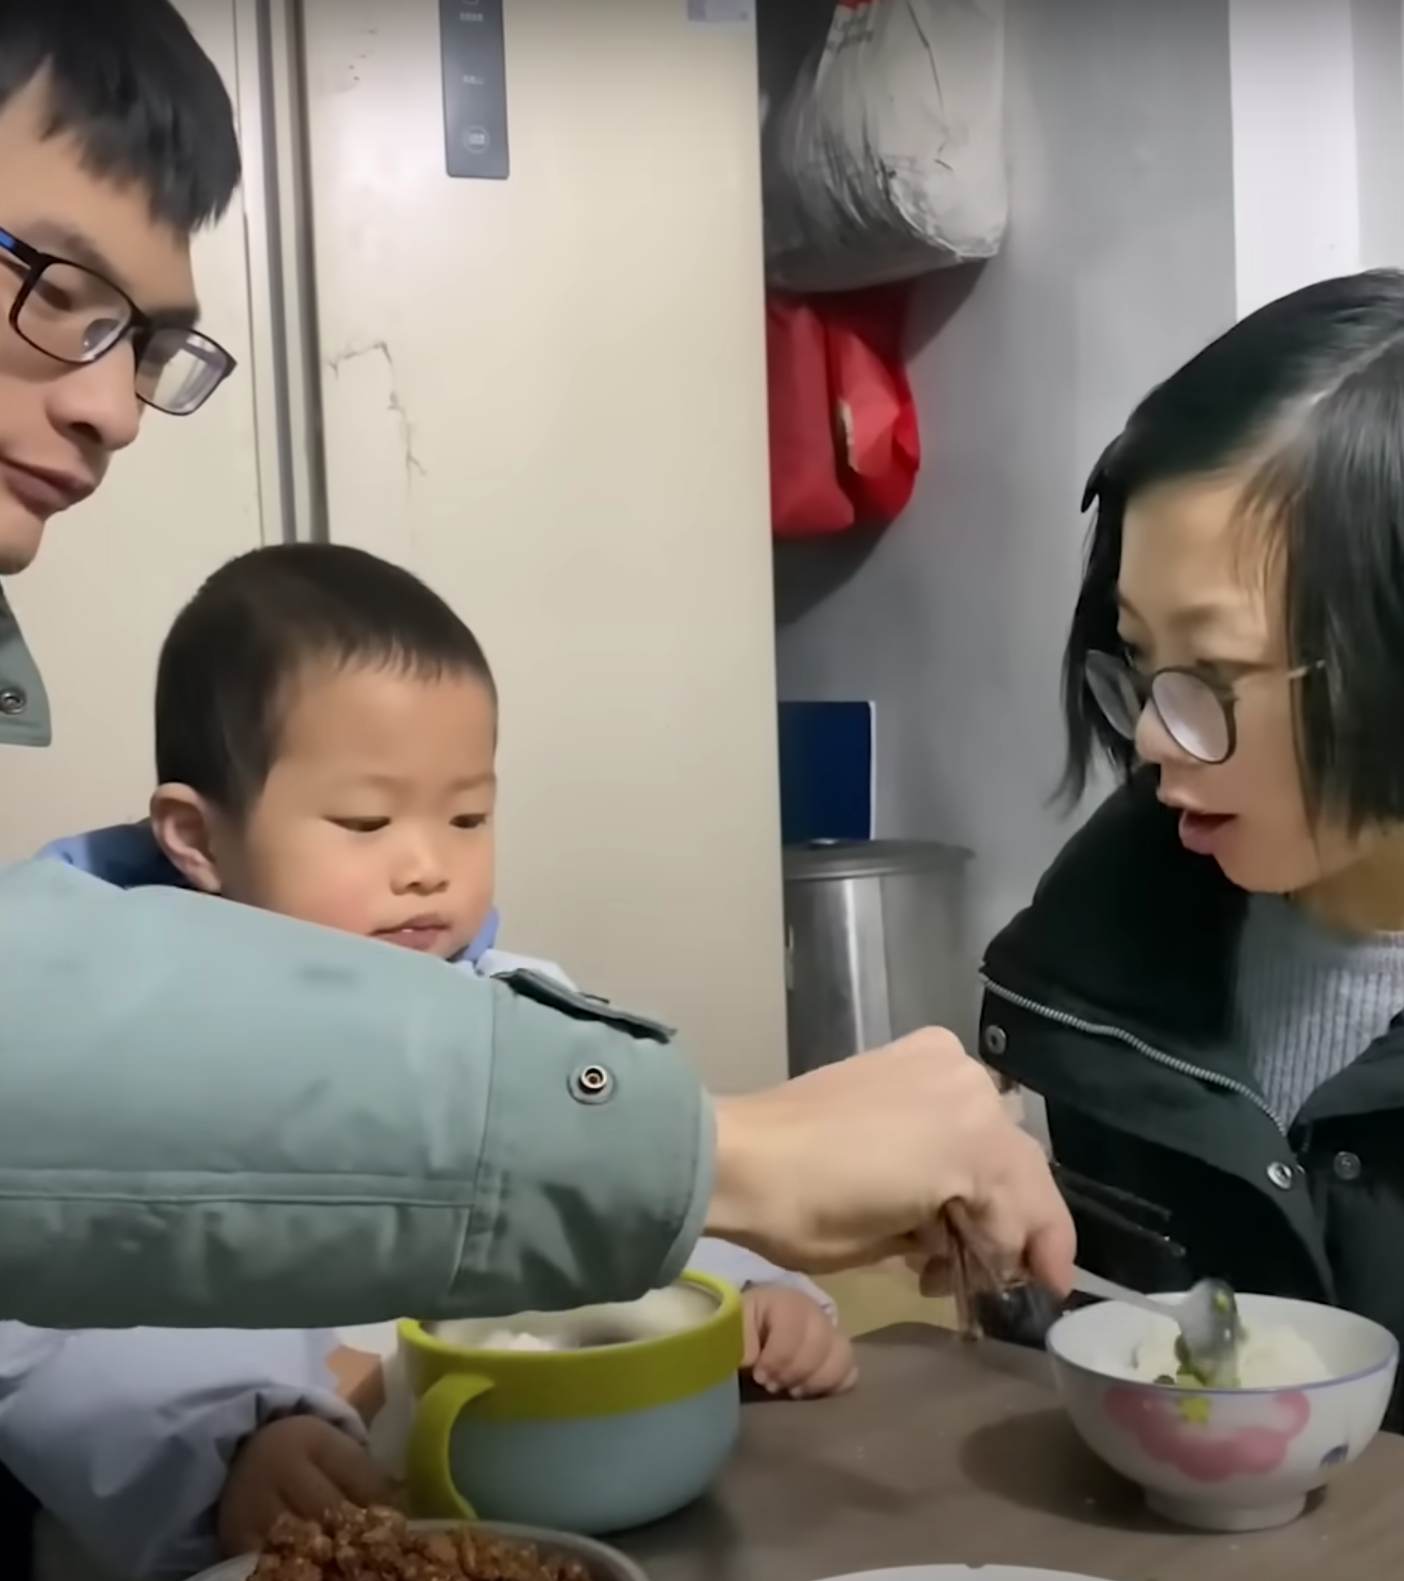 Pomelo and his parents enjoy their lives together. | Source: Youtube.com/South China Morning Post